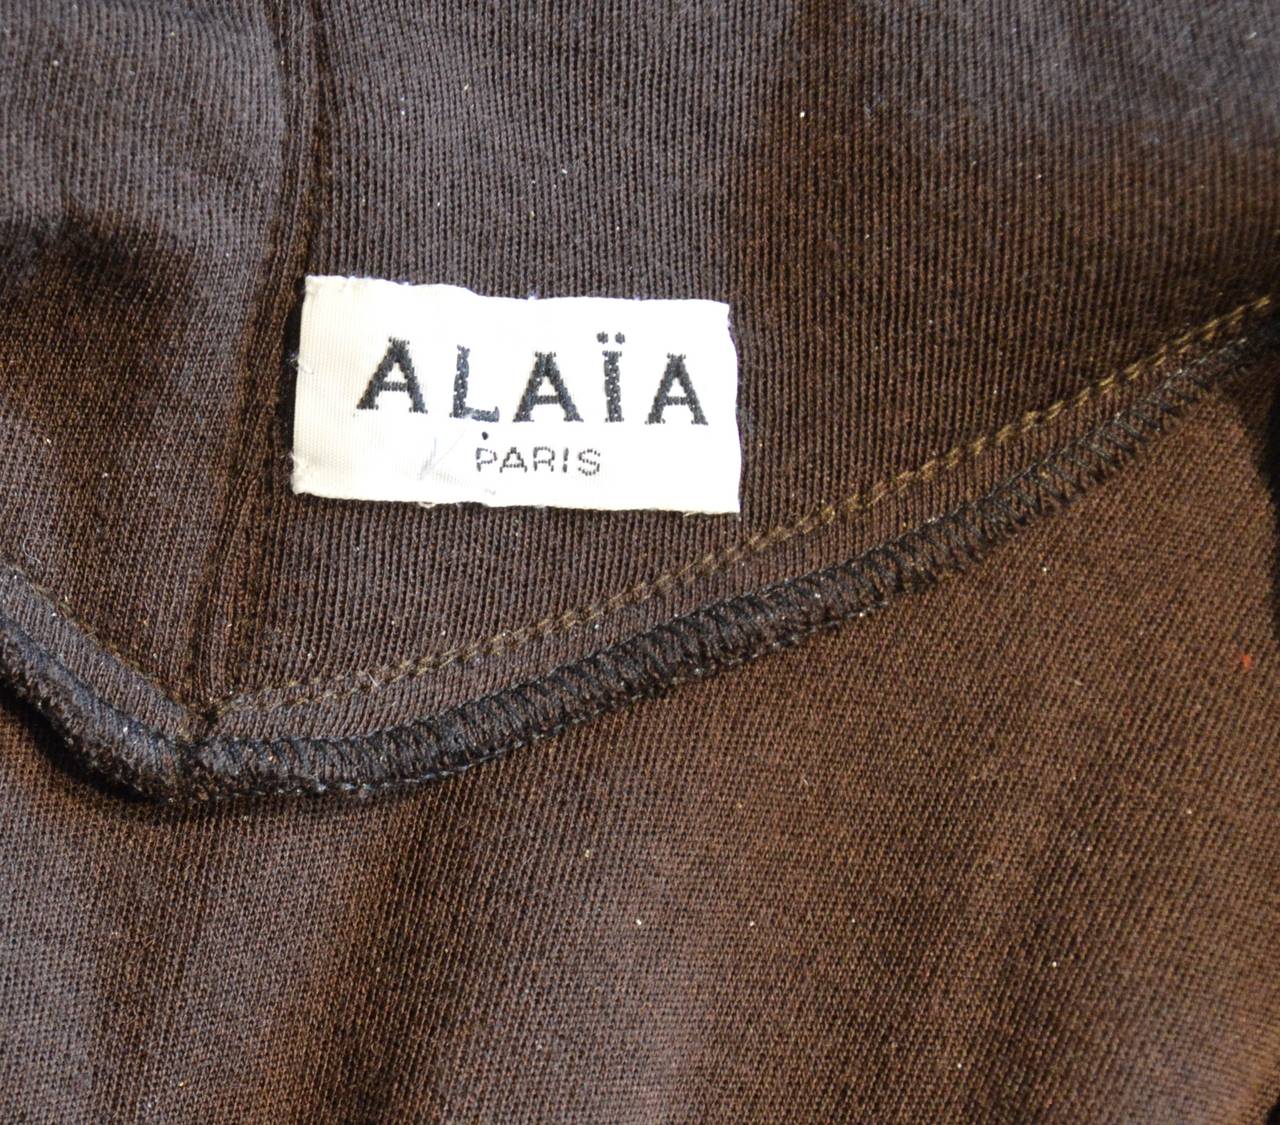 Unic 1980s Alaia Dark Brown Wool Jersey Sophisticated Day Dress 2